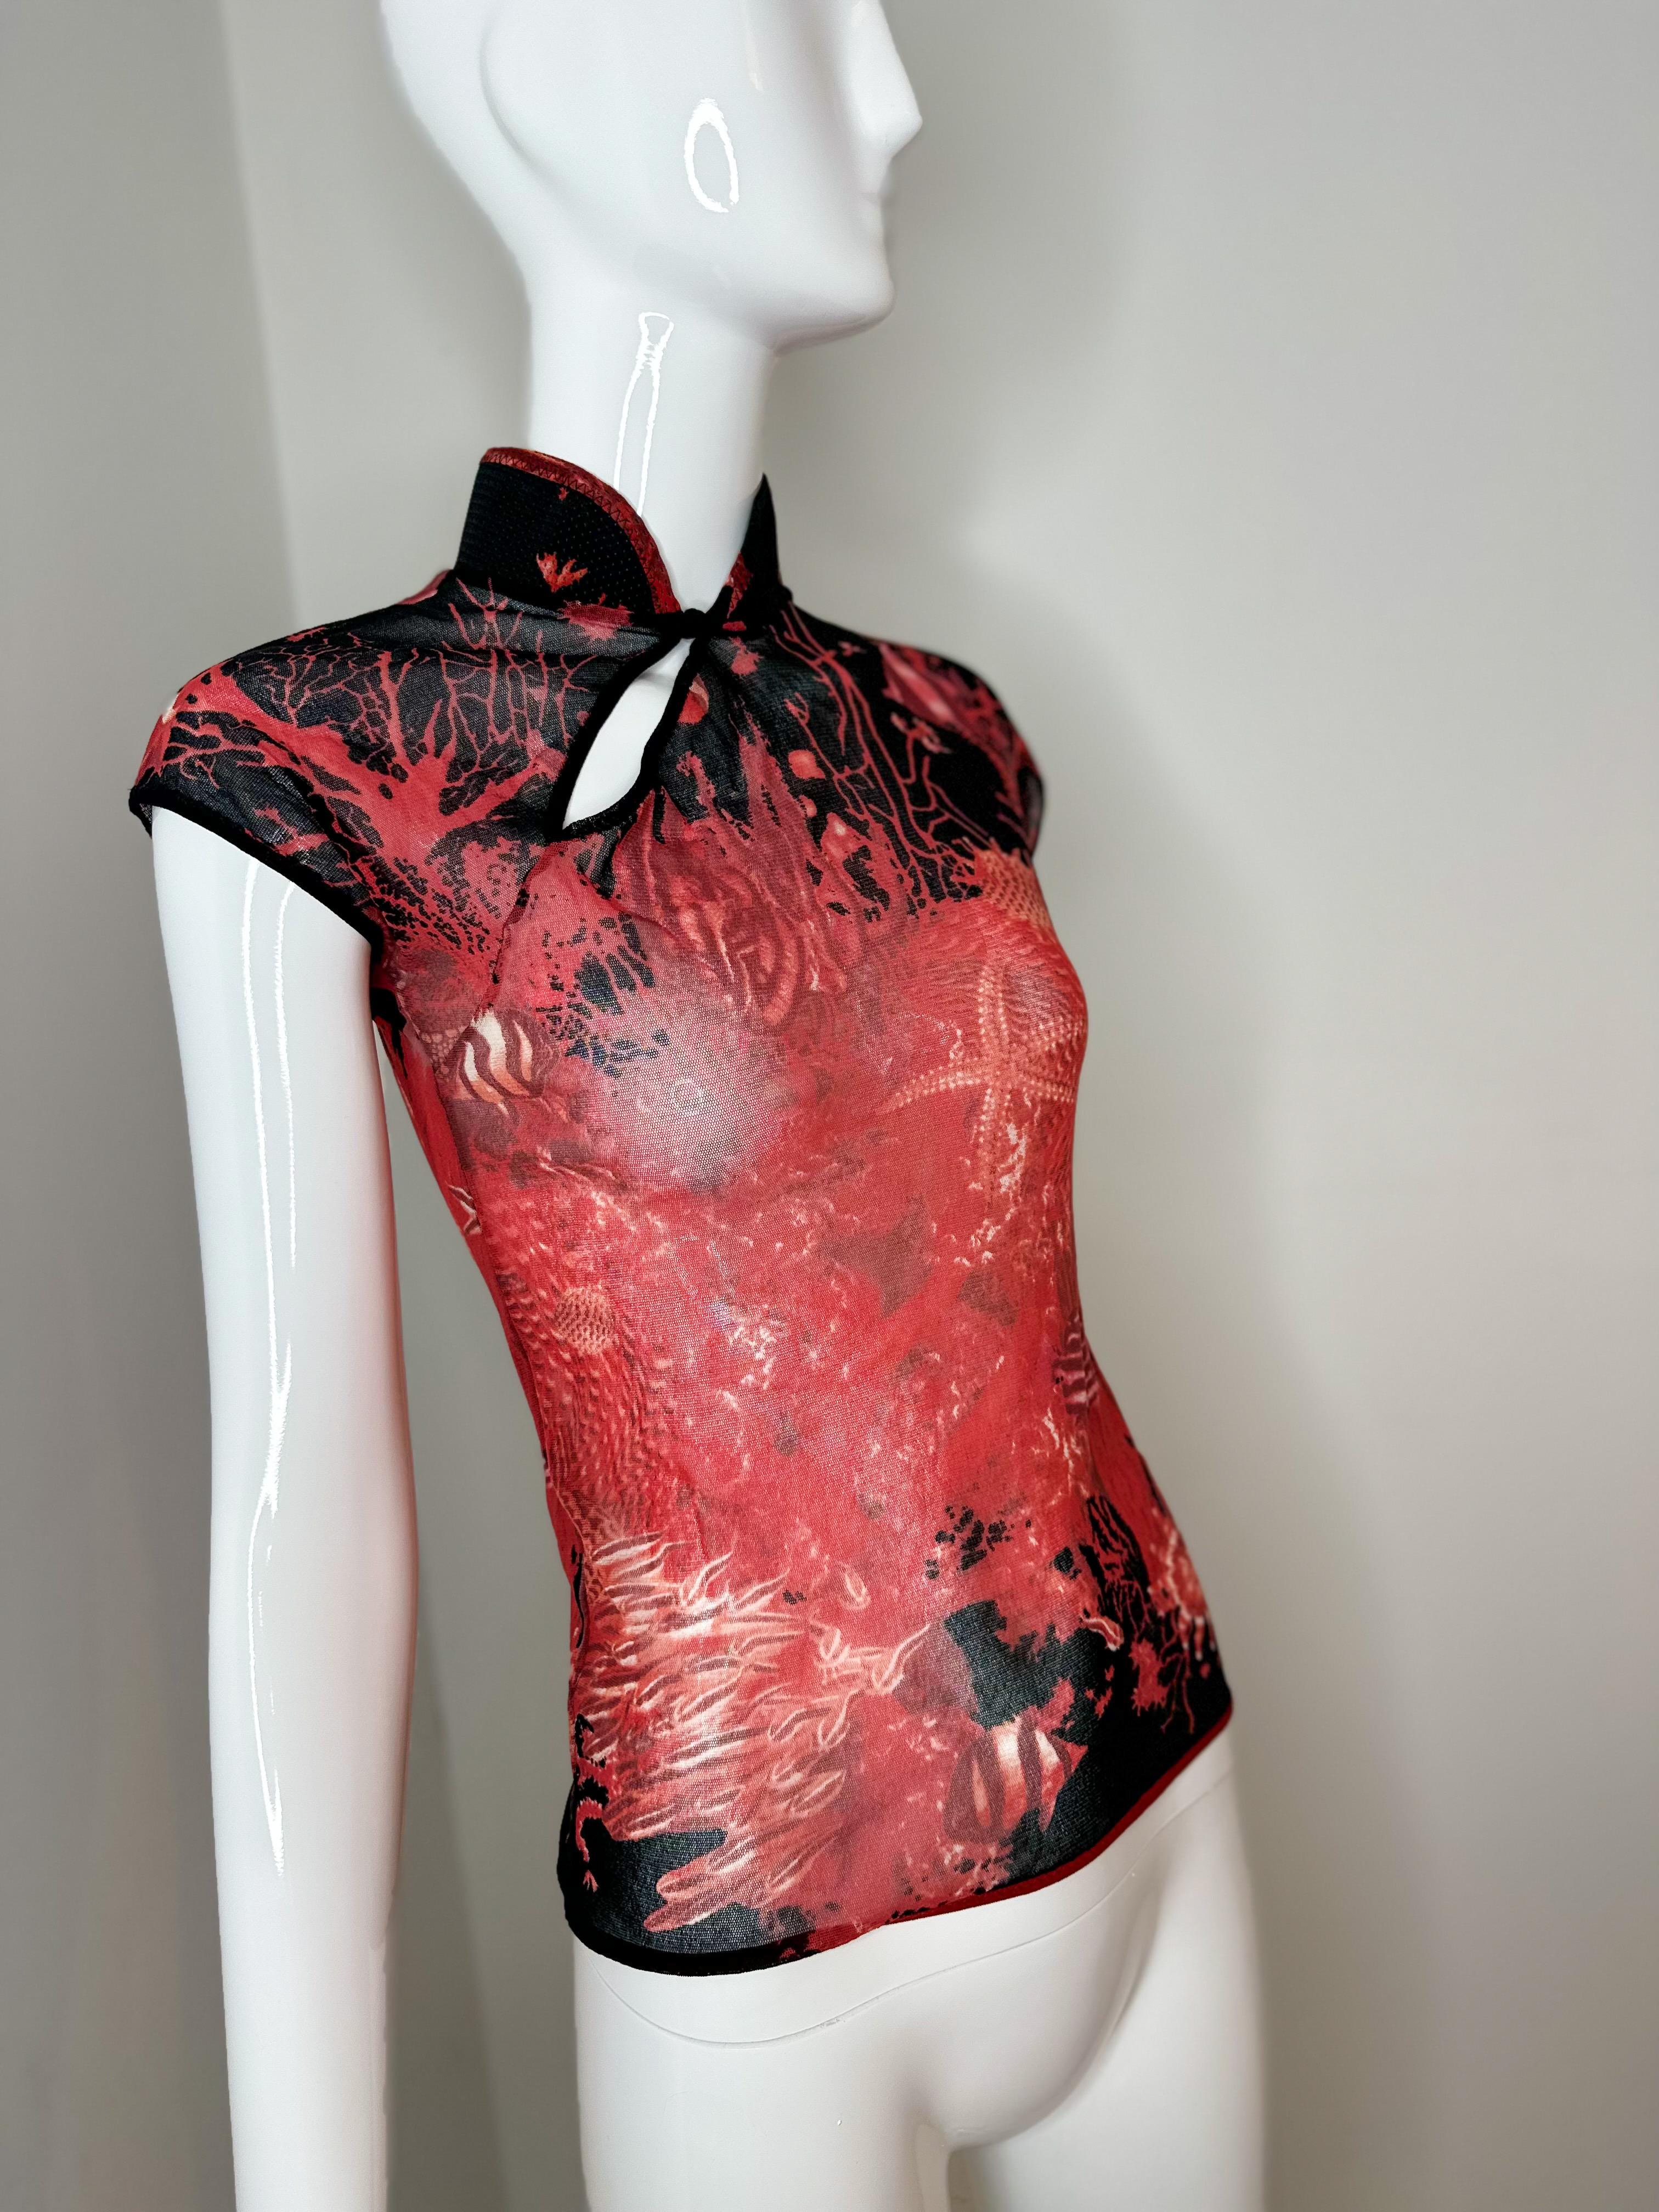 Jean Paul Gaultier red mesh top In Excellent Condition For Sale In Annandale, VA